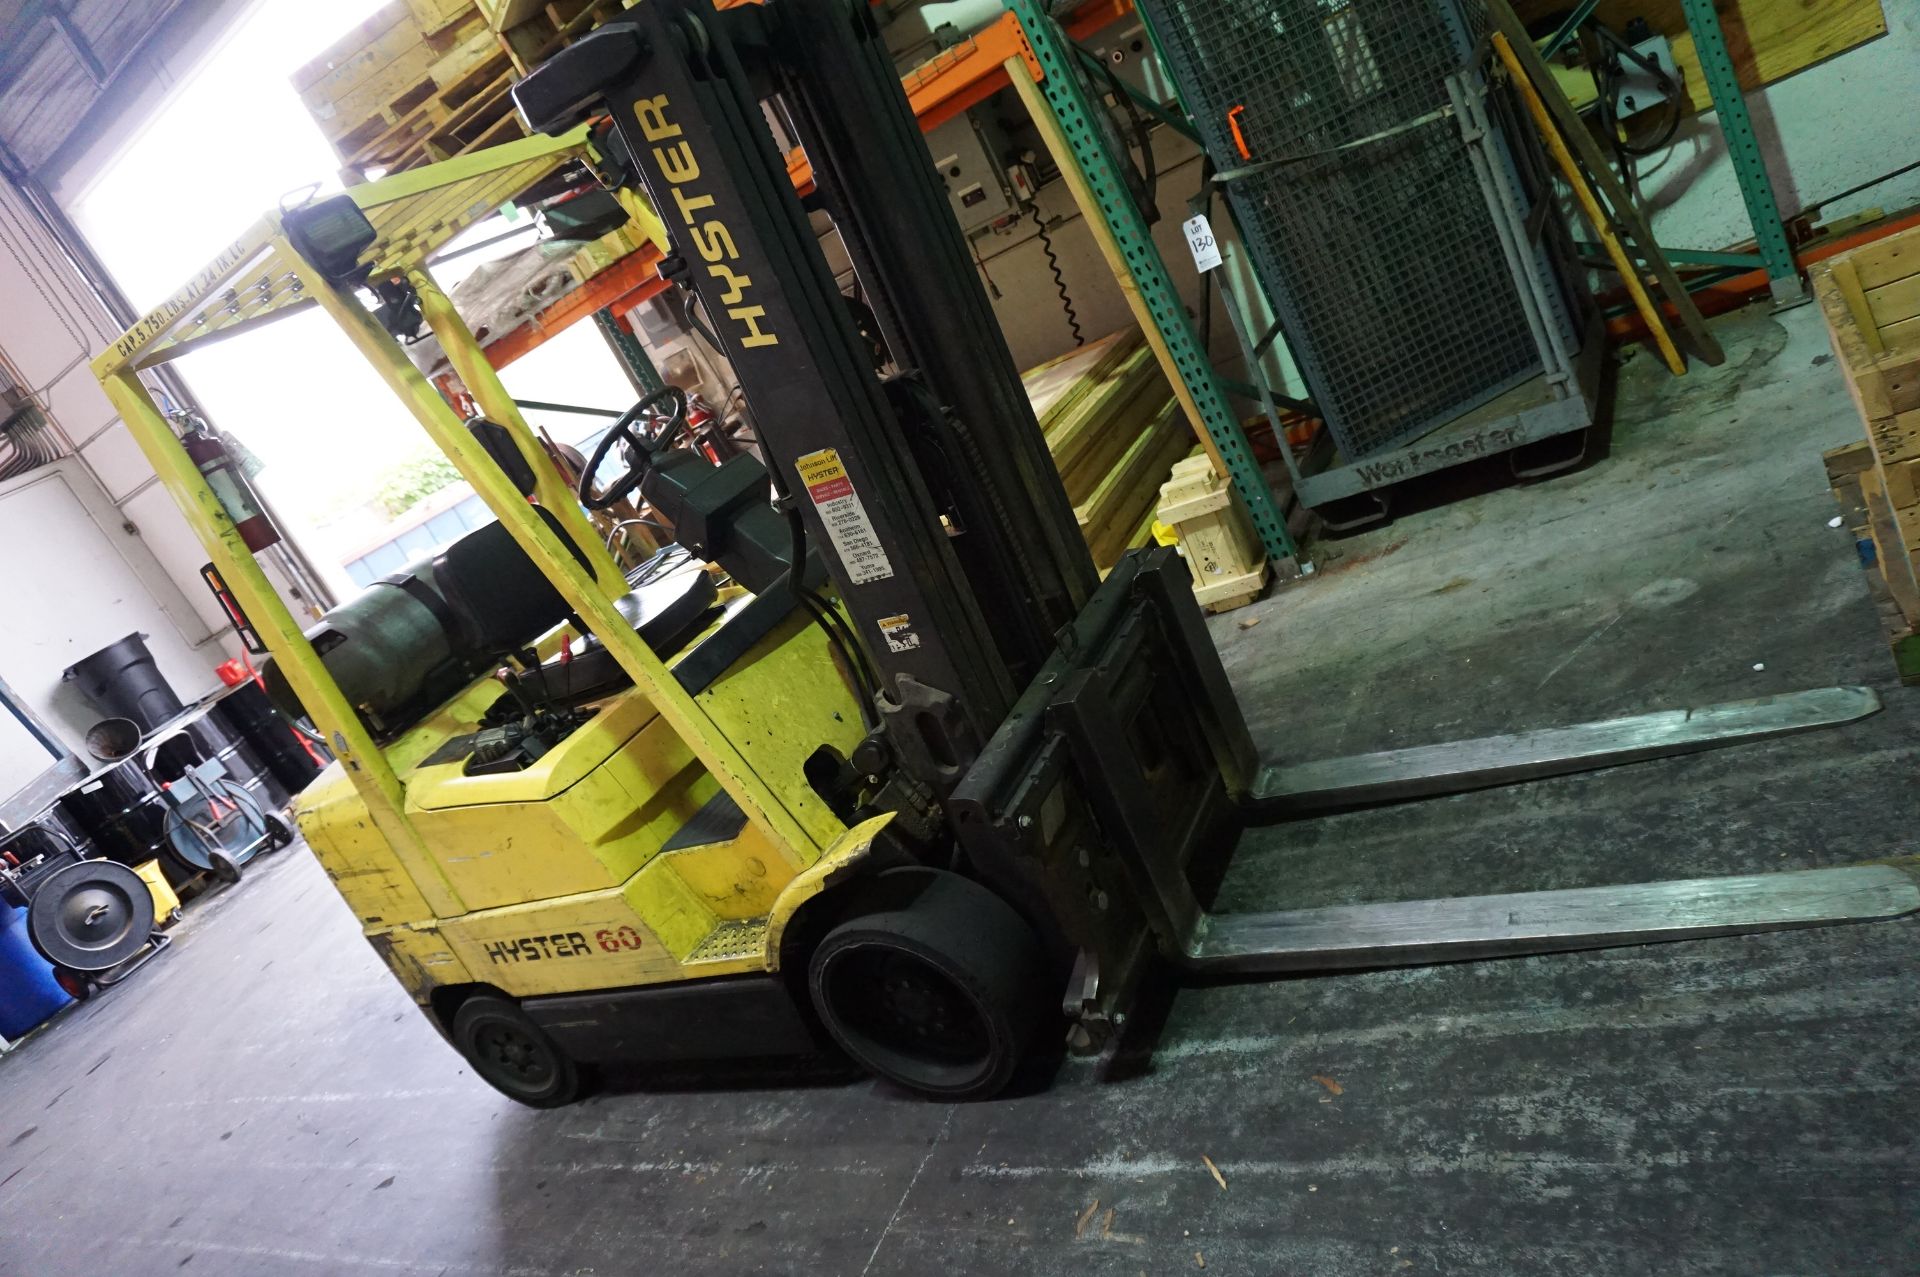 LATE PICK UP - HYSTER 60 LIFT TRUCK, MODEL S60XM, 5750 LB CAPACITY, APPROX HOURS 6250 AS OF 5/9/ - Image 2 of 10